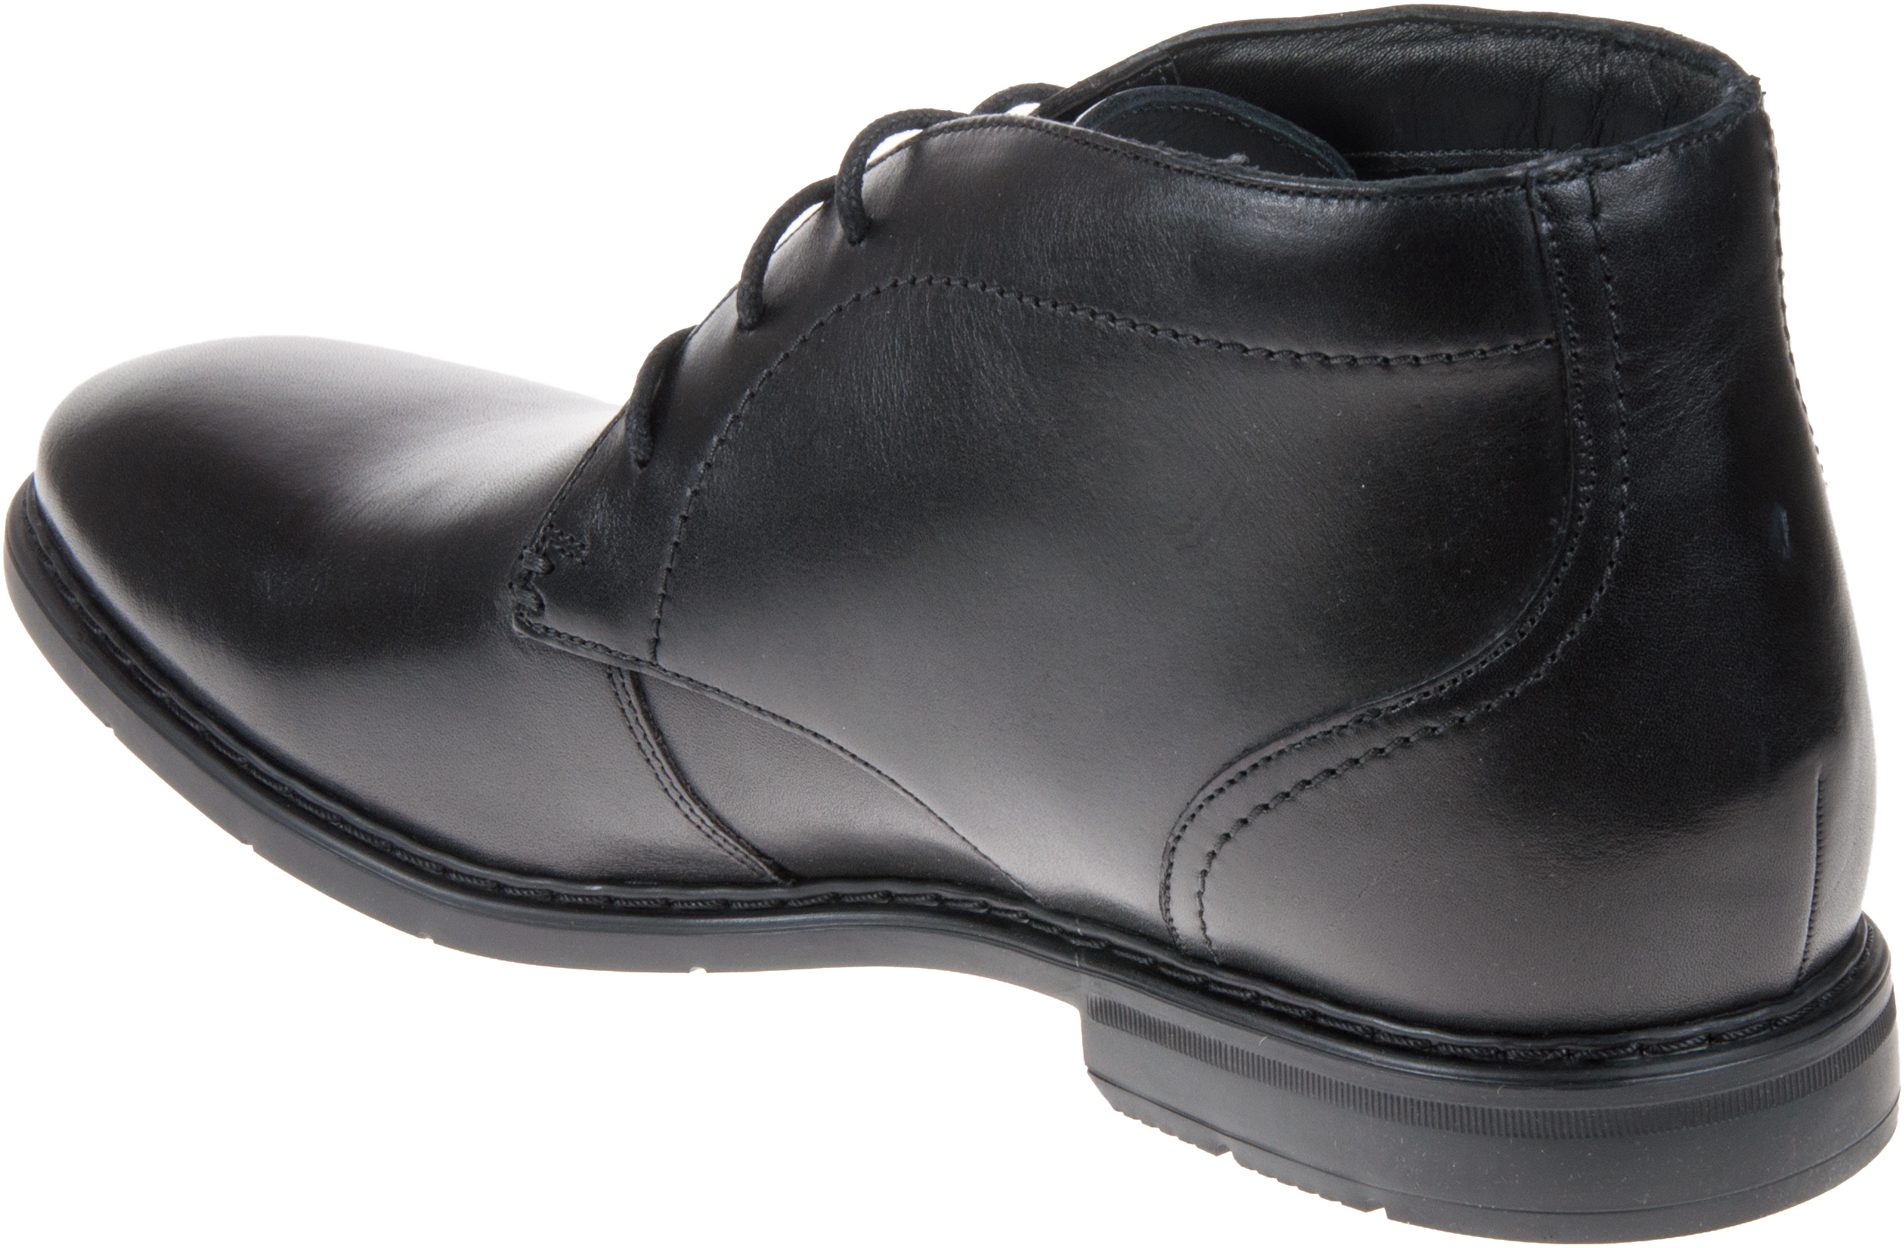 Clarks Banbury Mid Black Leather 26135424 - Casual Boots - Humphries Shoes